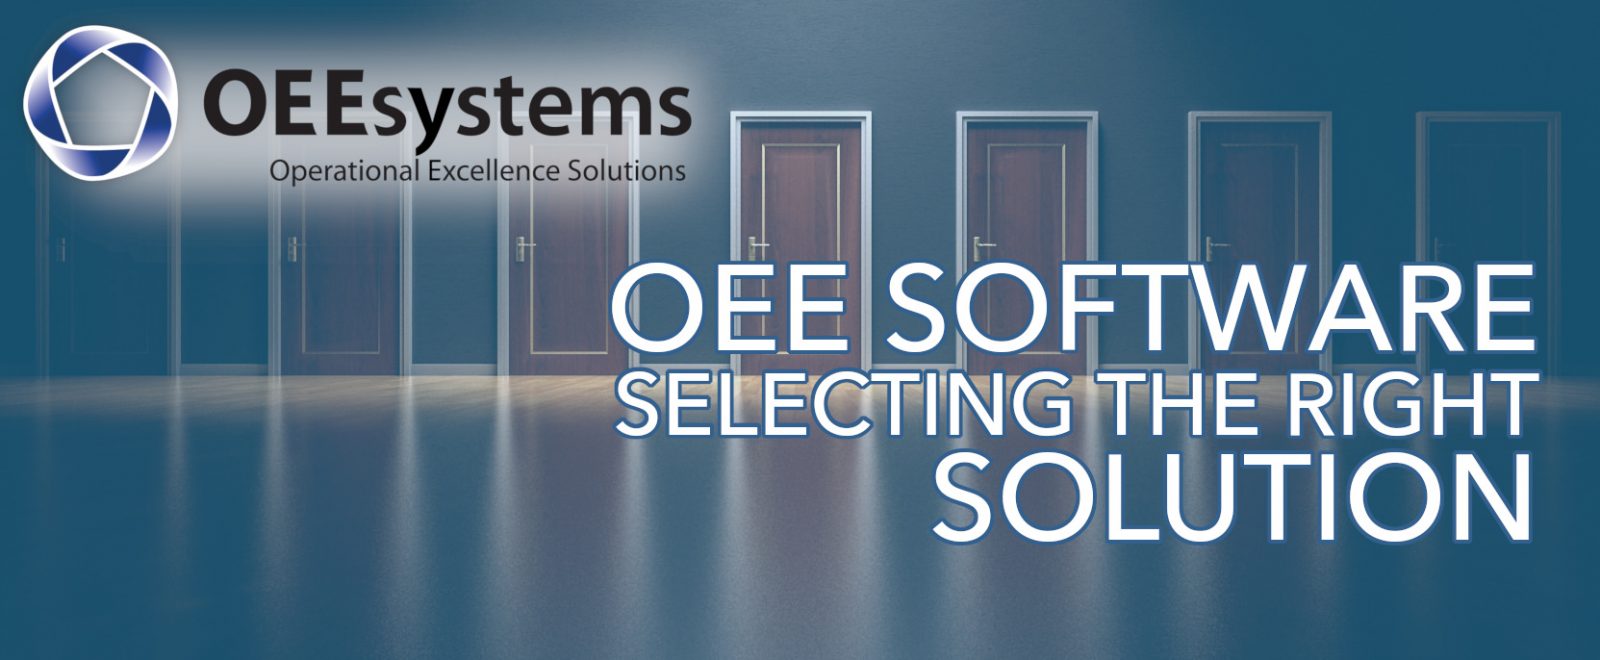 OEE Software Selection | OEEsystems